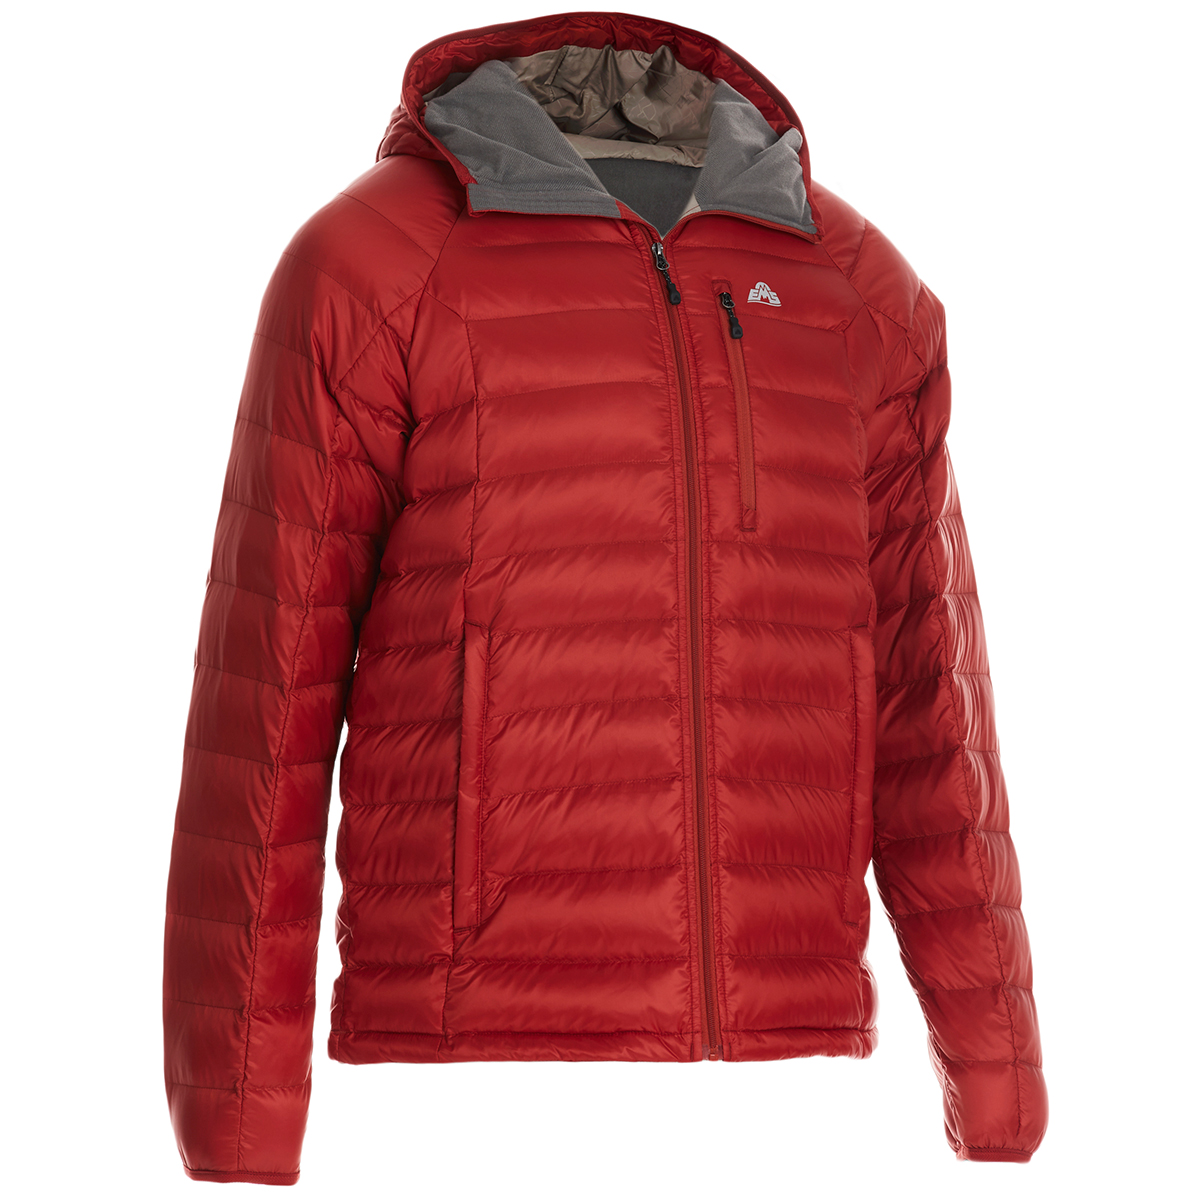 EMS Men’s Featherpack Hooded Jacket